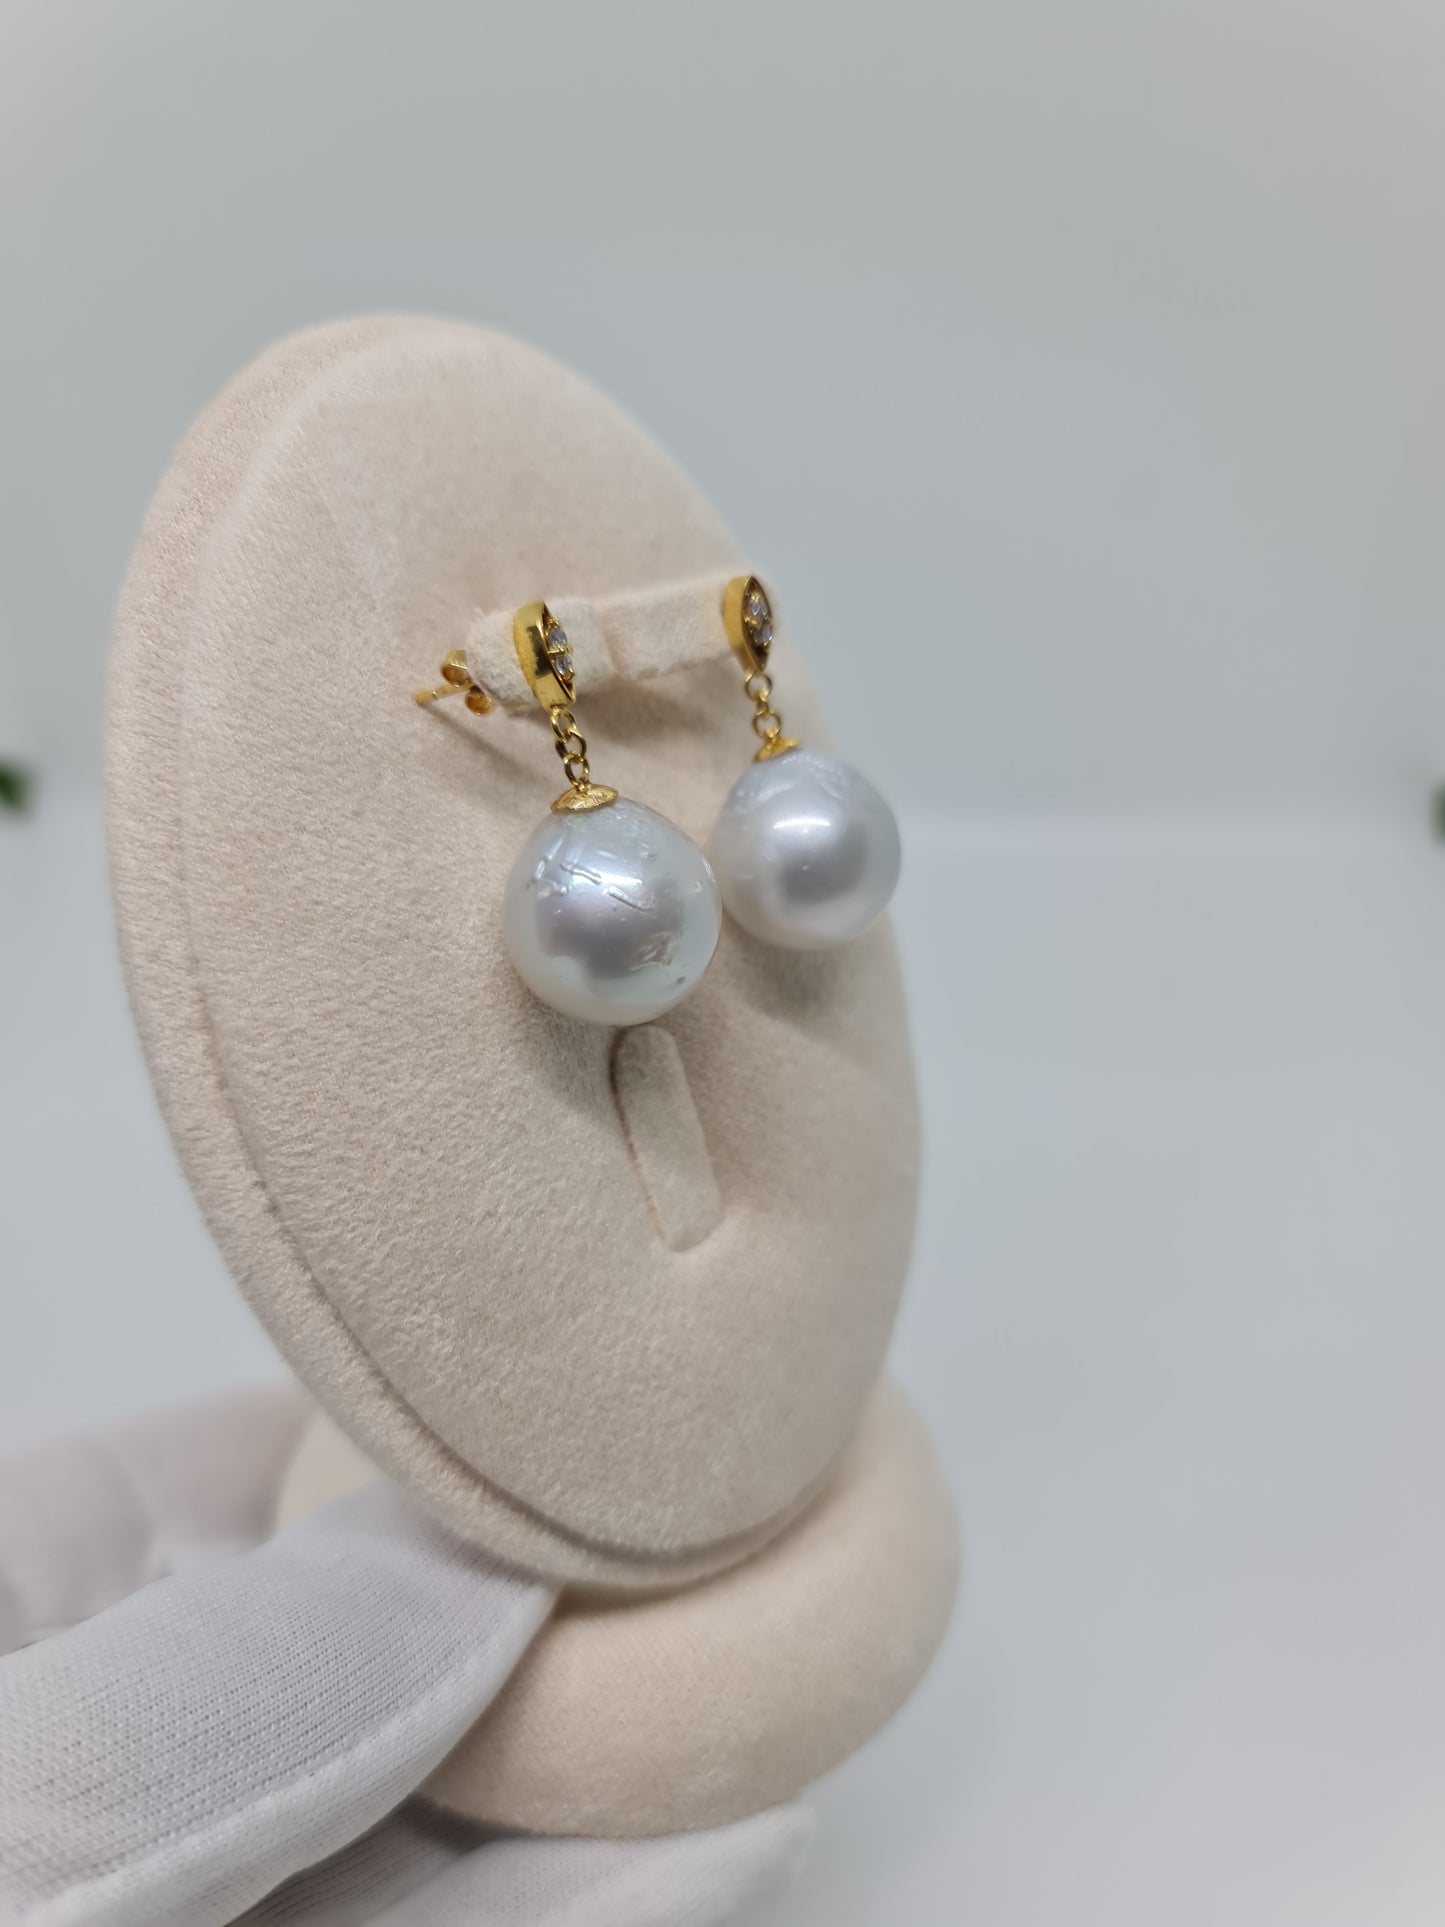 16.5mm Silver White South Sea Pearls Earrings 14K with Diamond Big Pearls